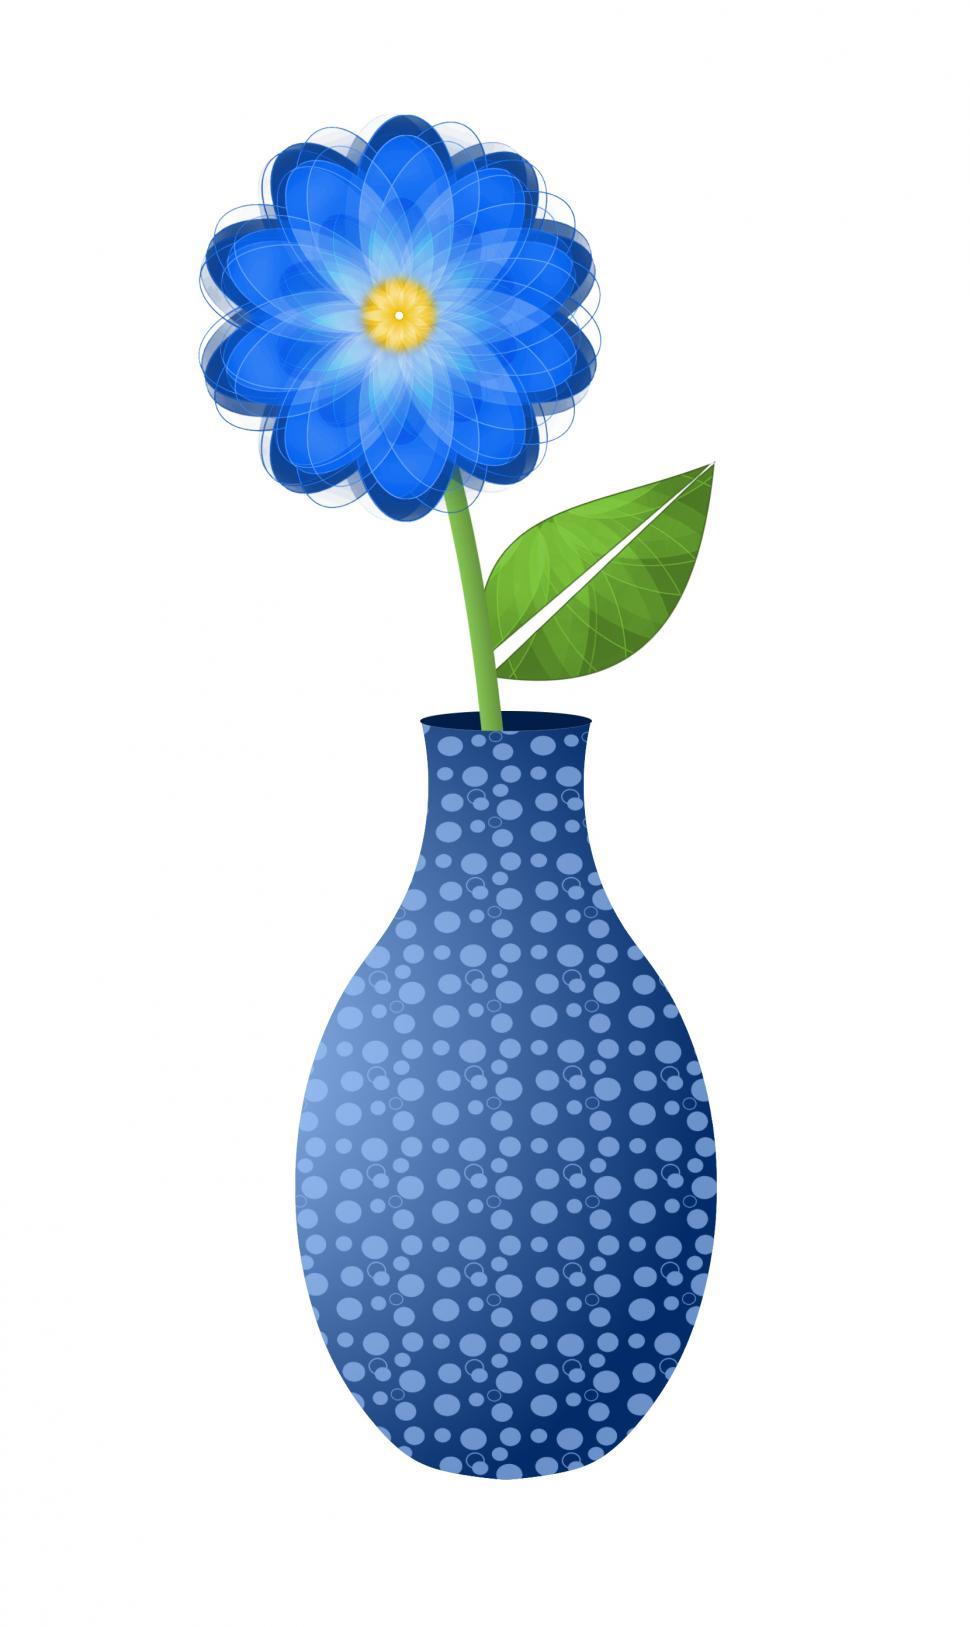 Free Image of Blue and Yellow Flower in Vase  